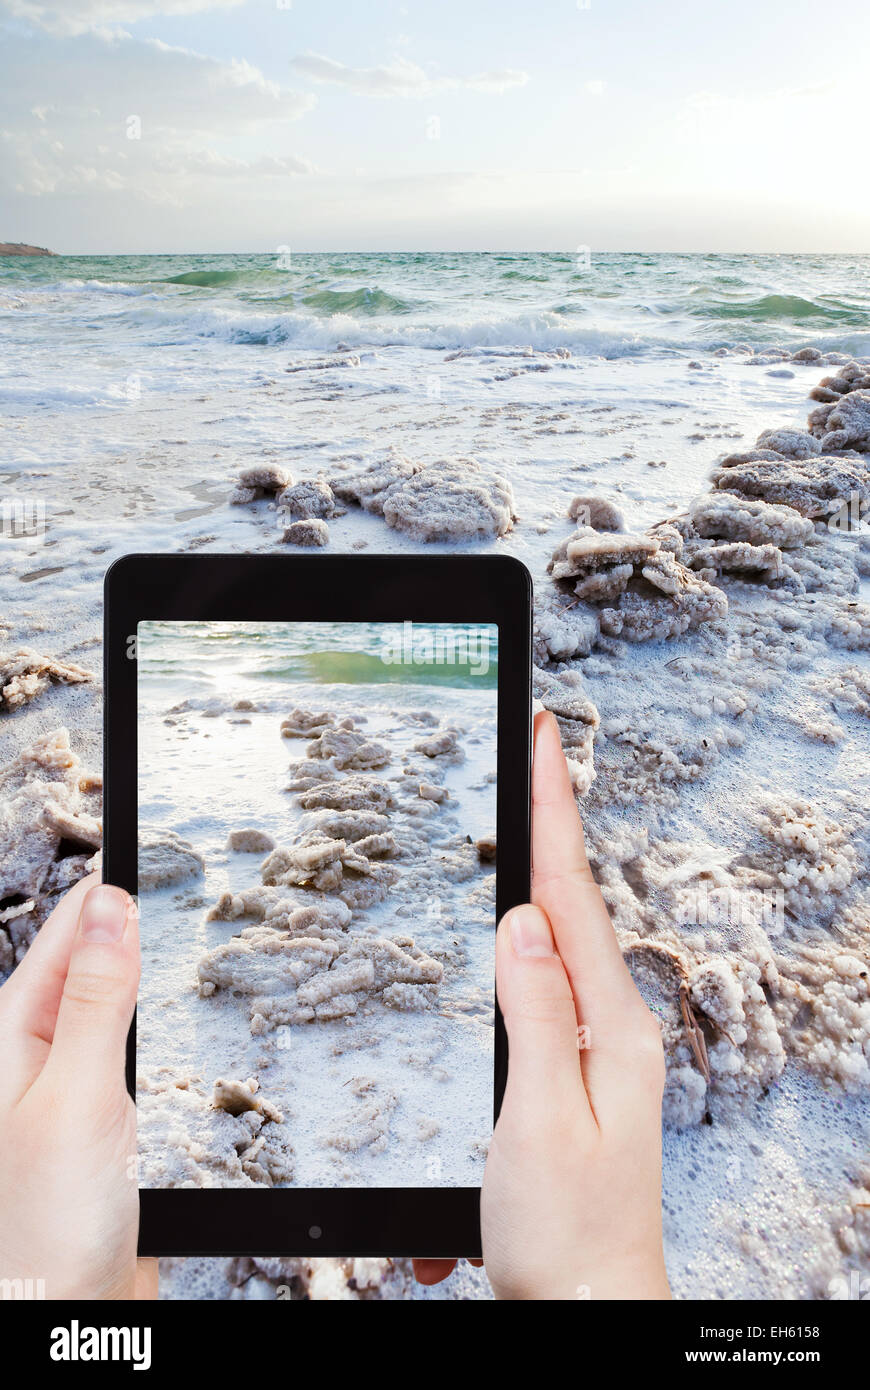 travel concept - tourist snapping photo of crystal salt on Dead Sea beach on mobile gadget, Jordan Stock Photo